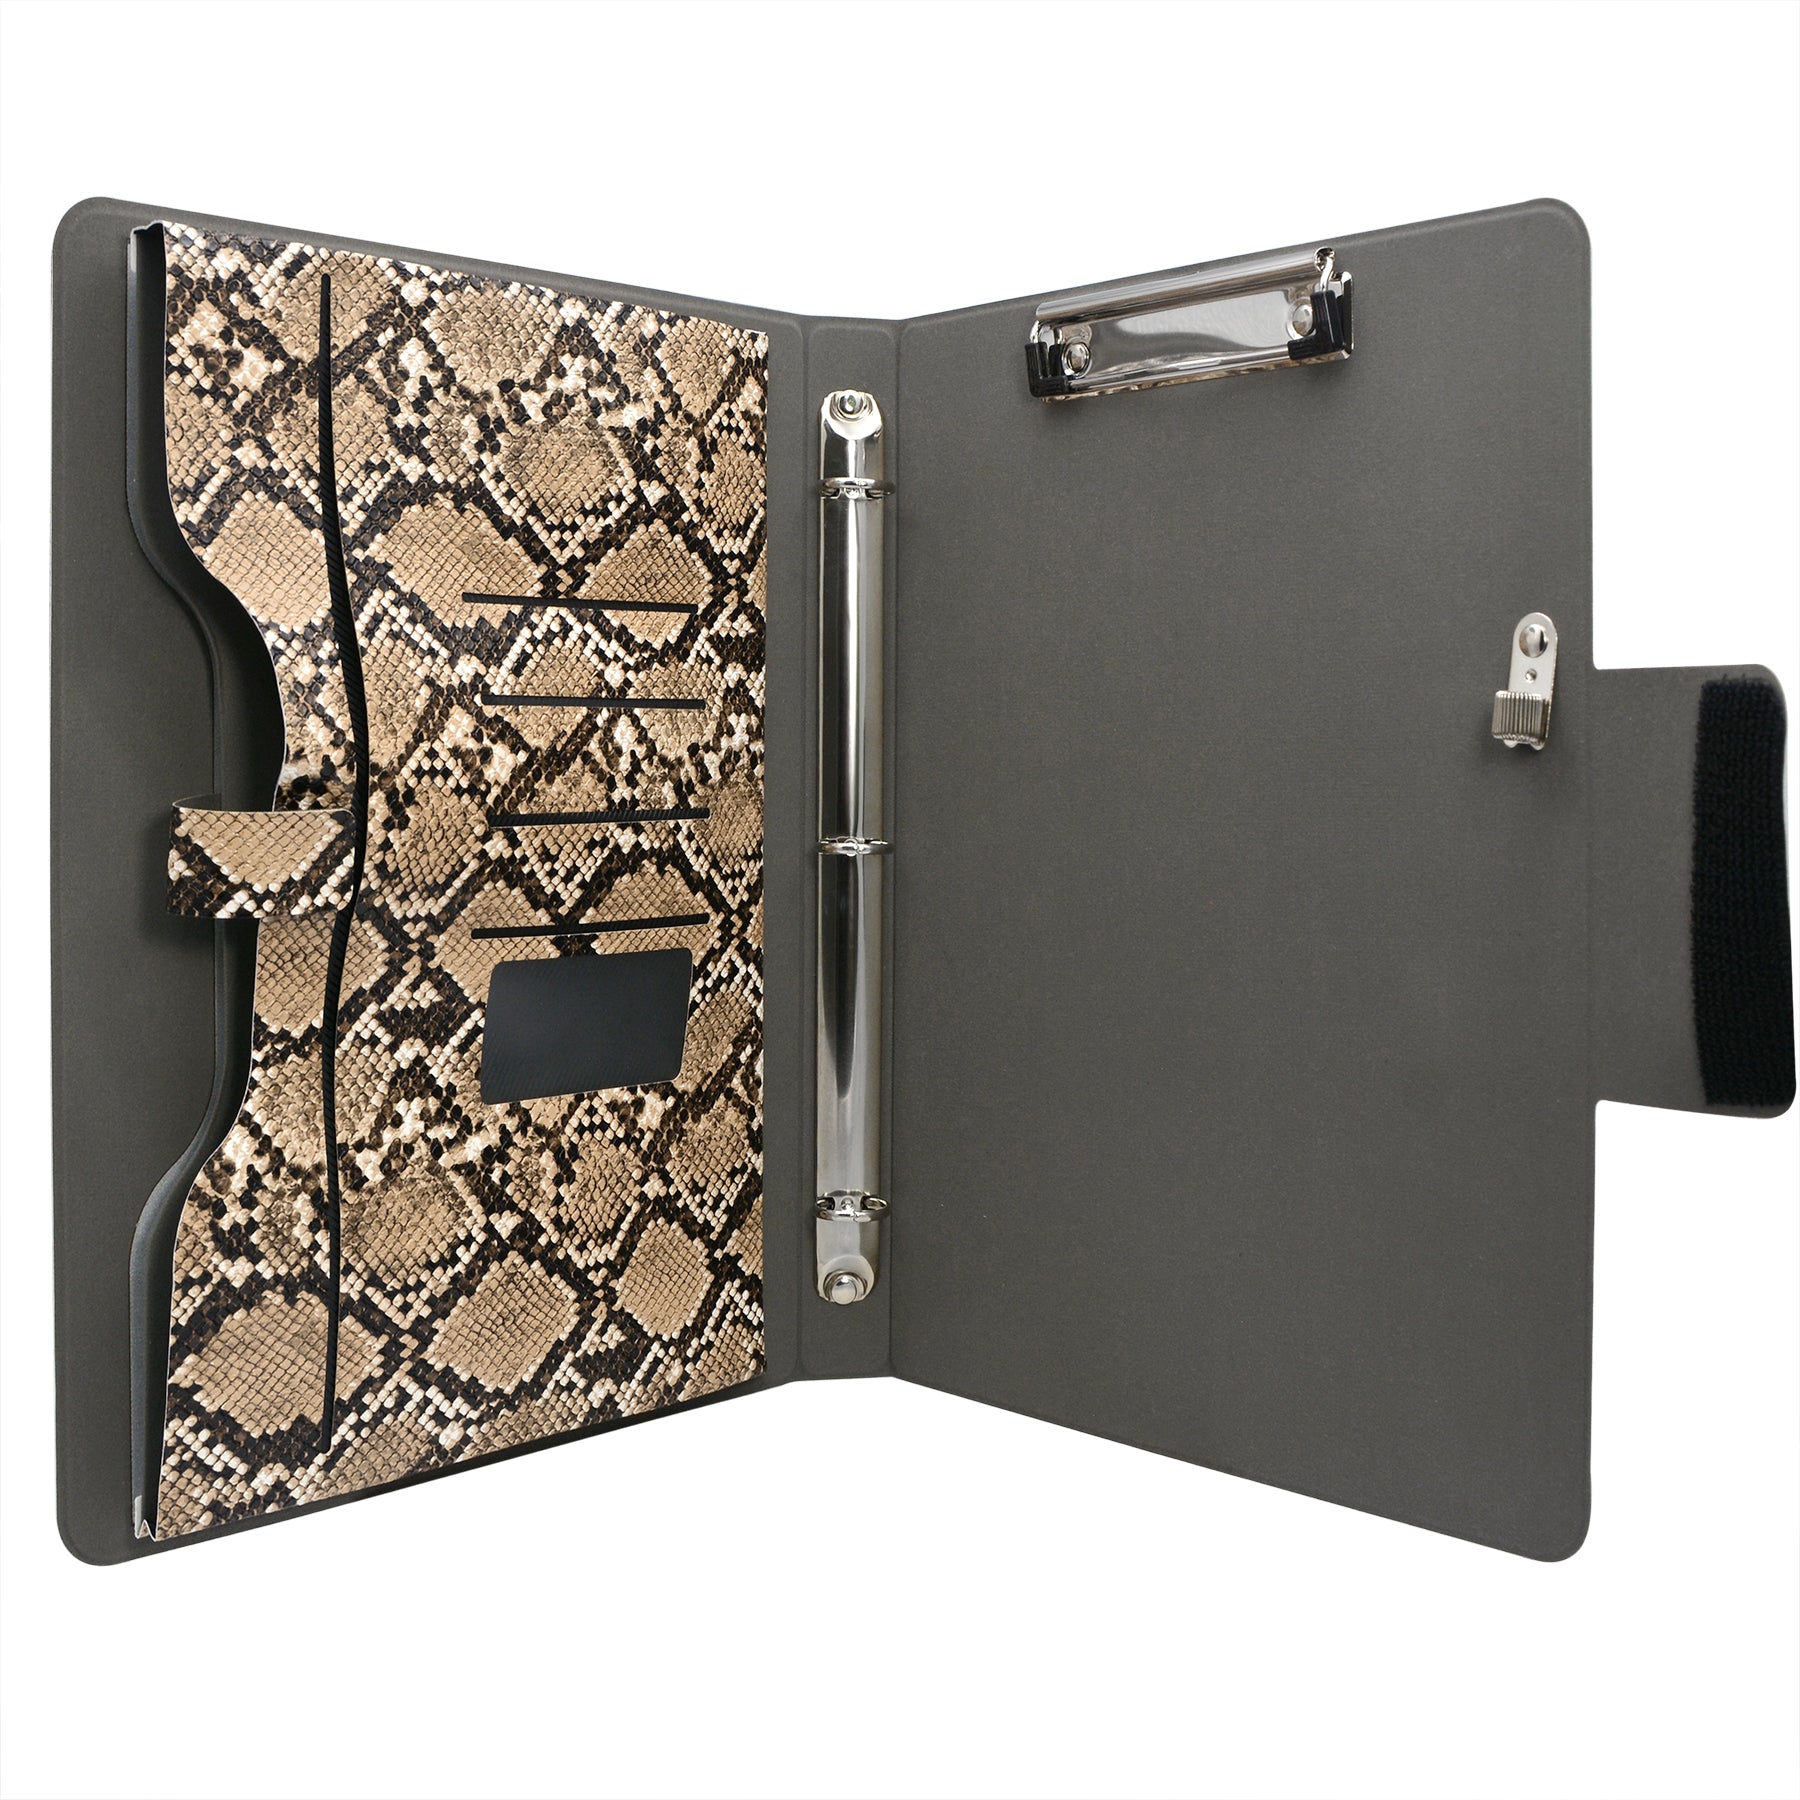 A4 Clamp Binder File Folder with Single / Double Strong Clip — A Lot Mall